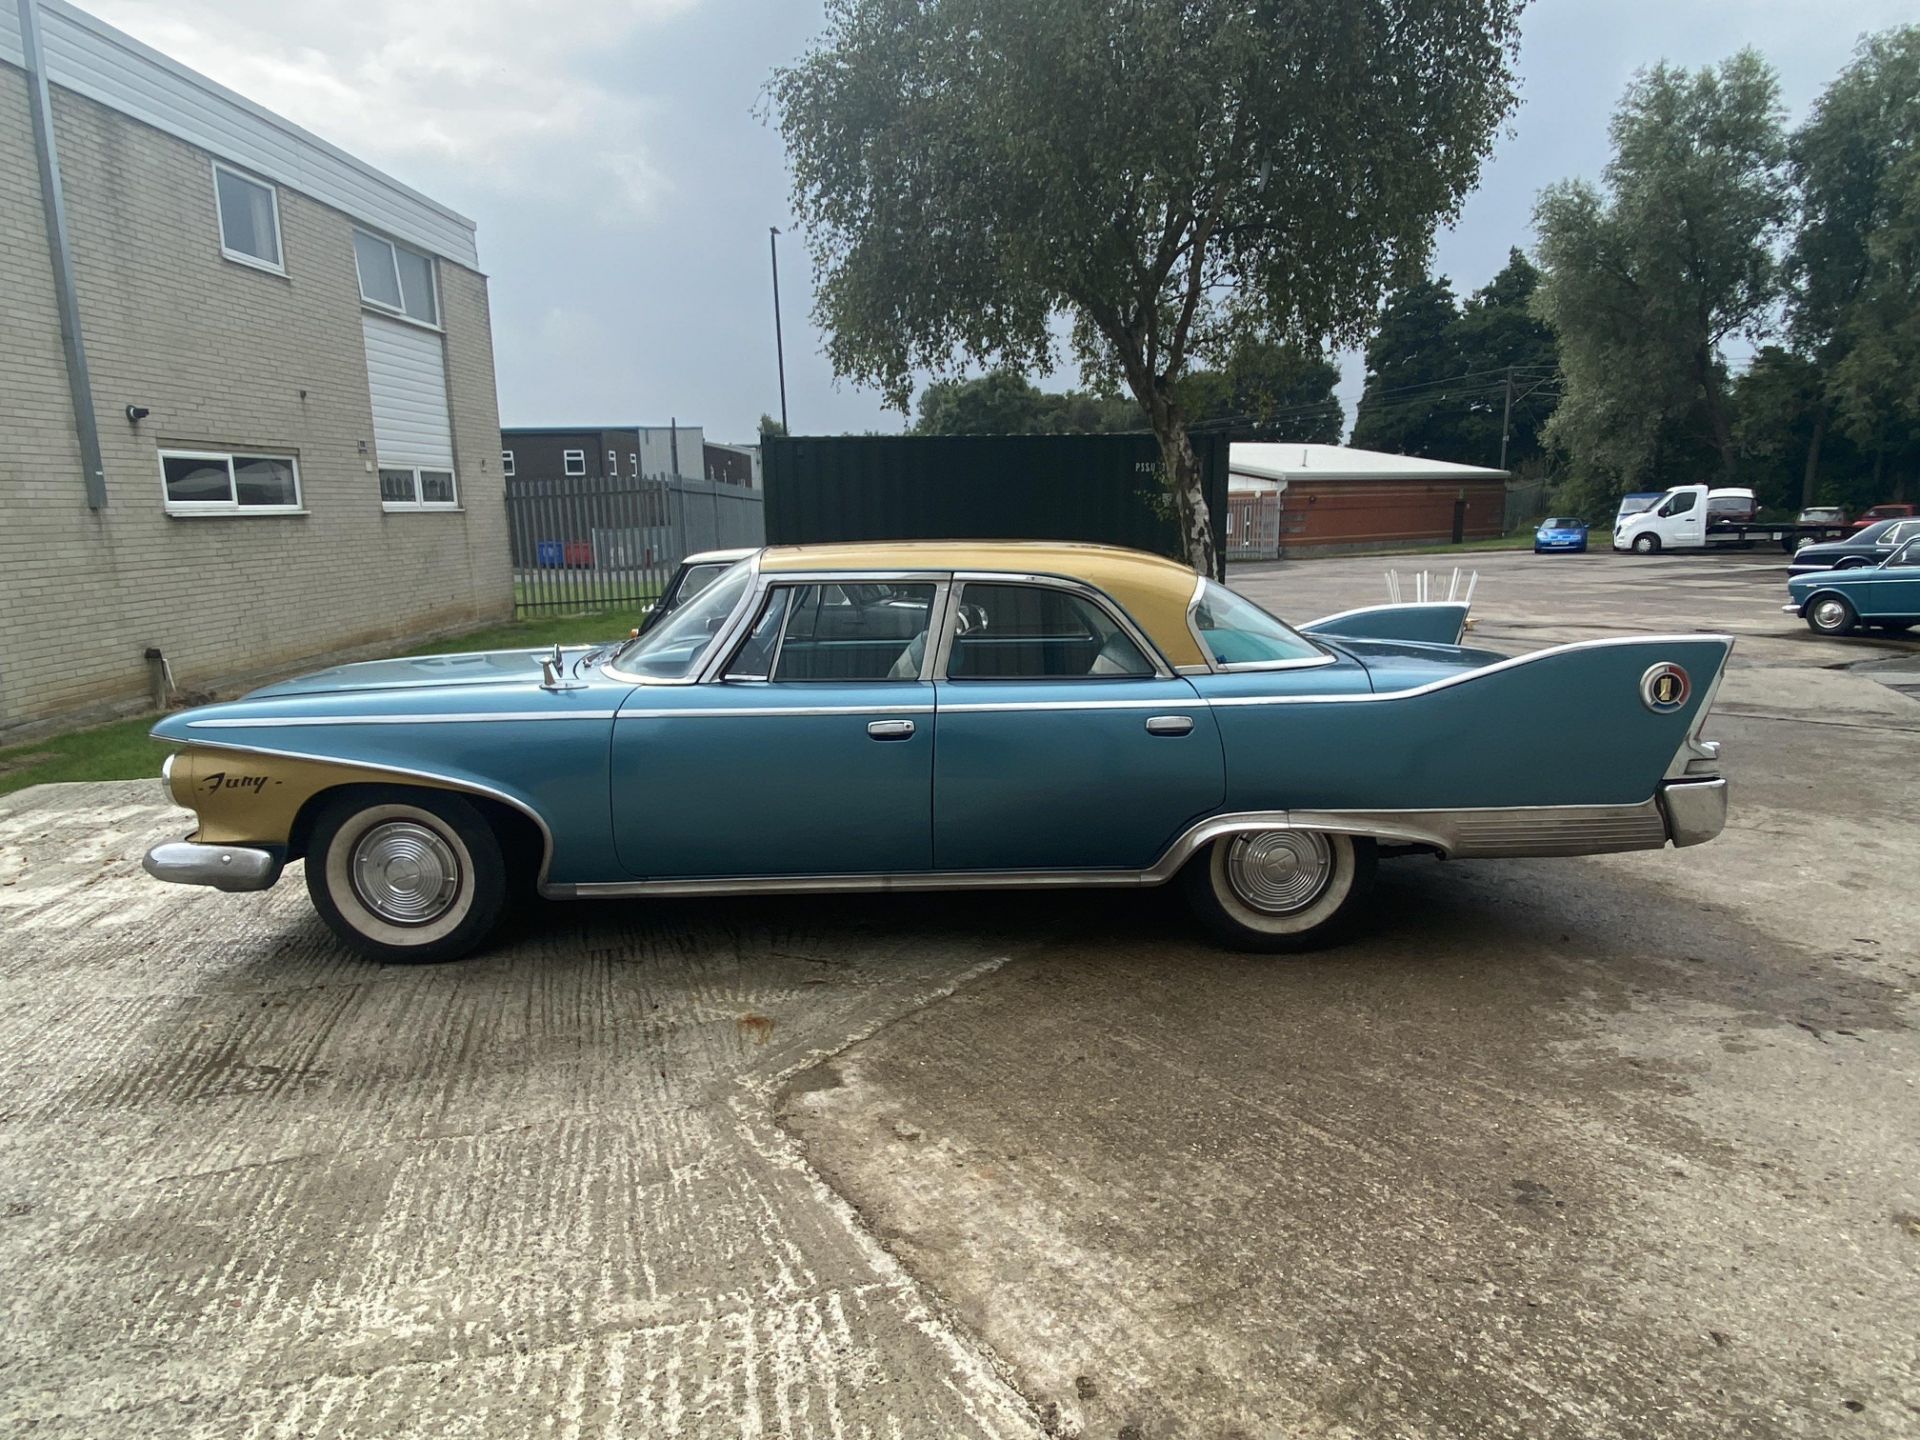 Plymouth Fury - Image 9 of 41